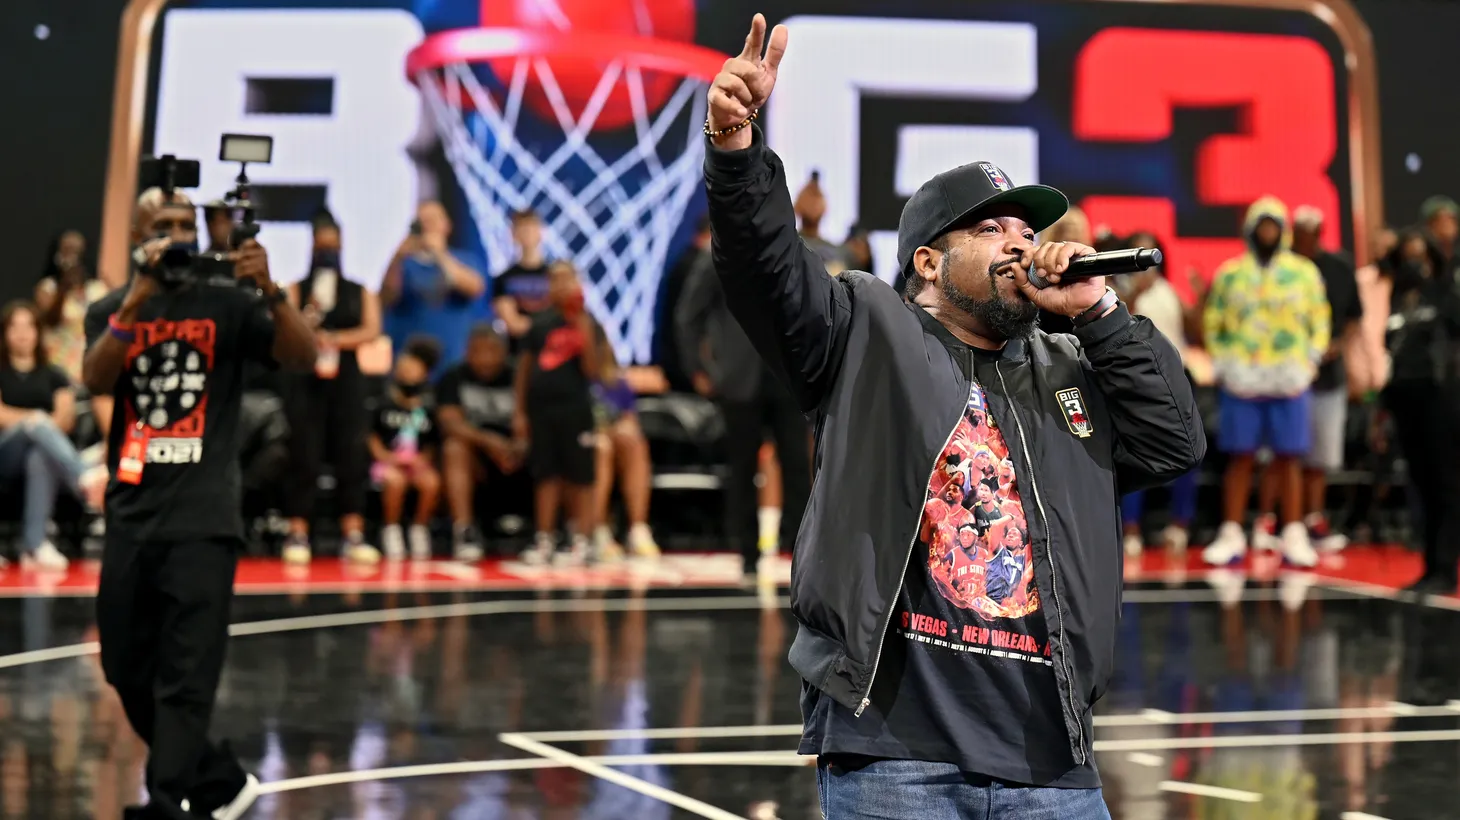 Hip-hop and movie star Ice Cube co-owns a 3-on-3 basketball league called the BIG3. Now he’s taking the game to the Olympics.